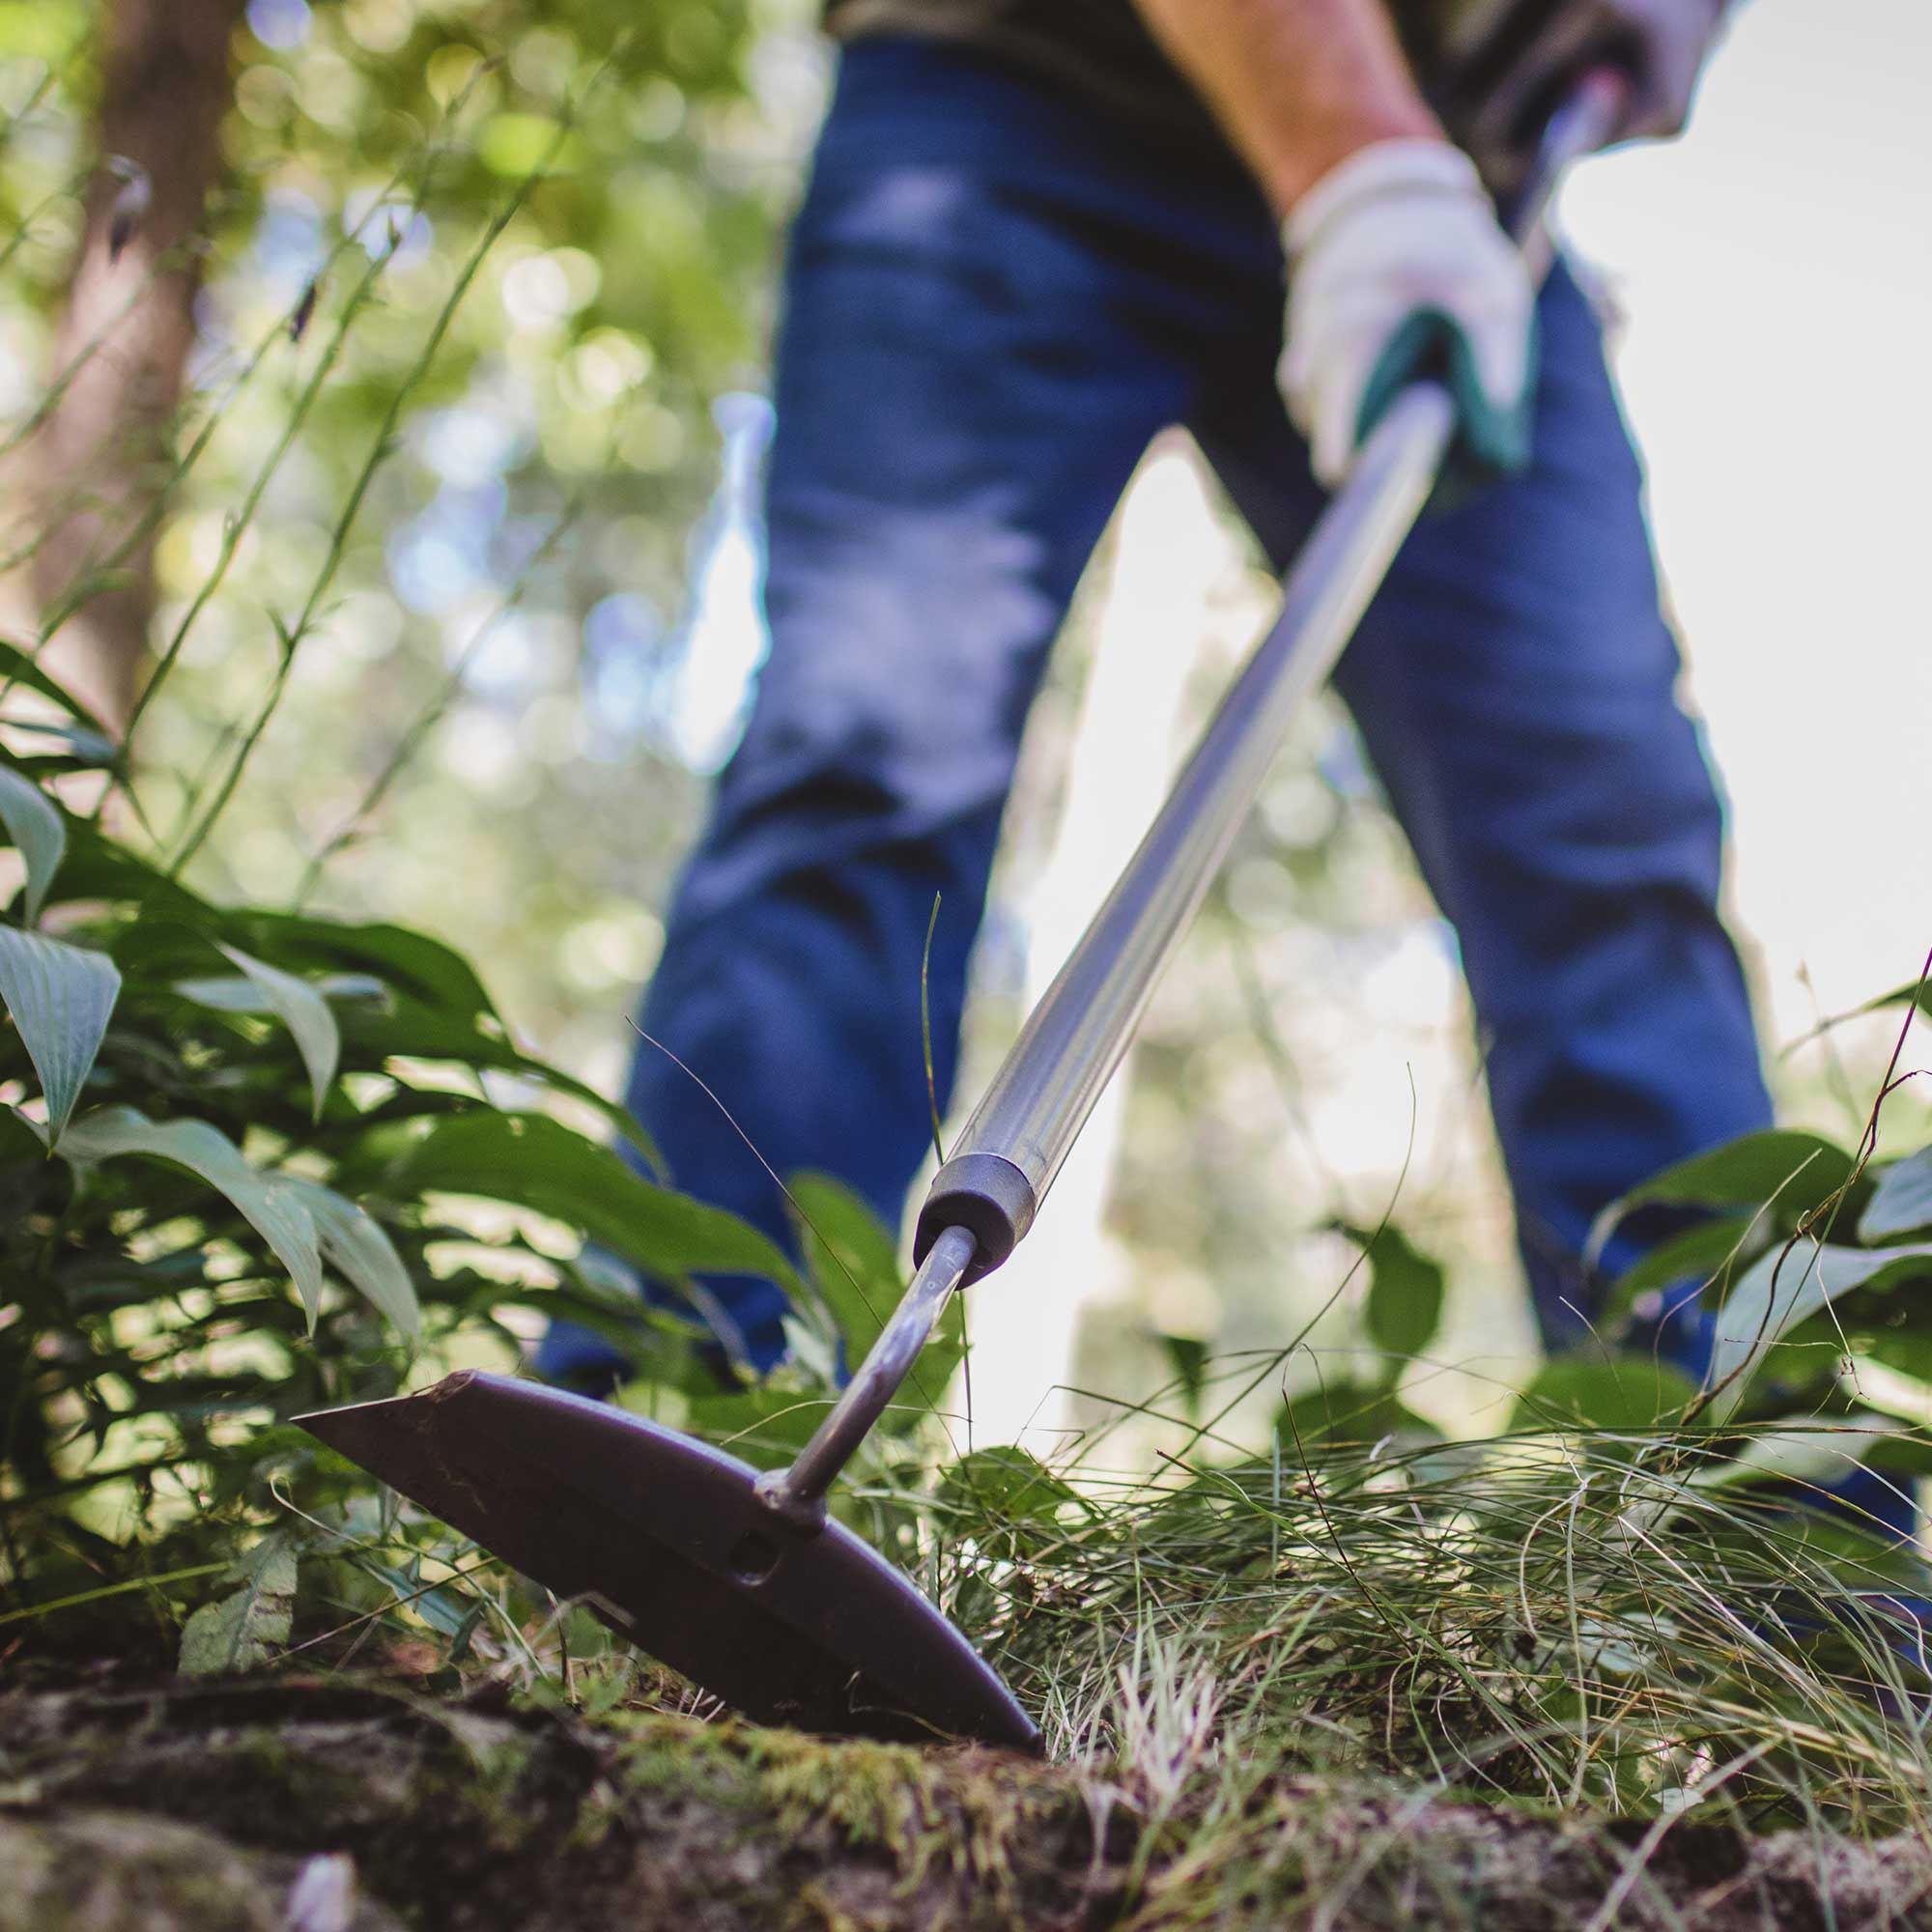 Weeding 101: How to Weed Your Garden